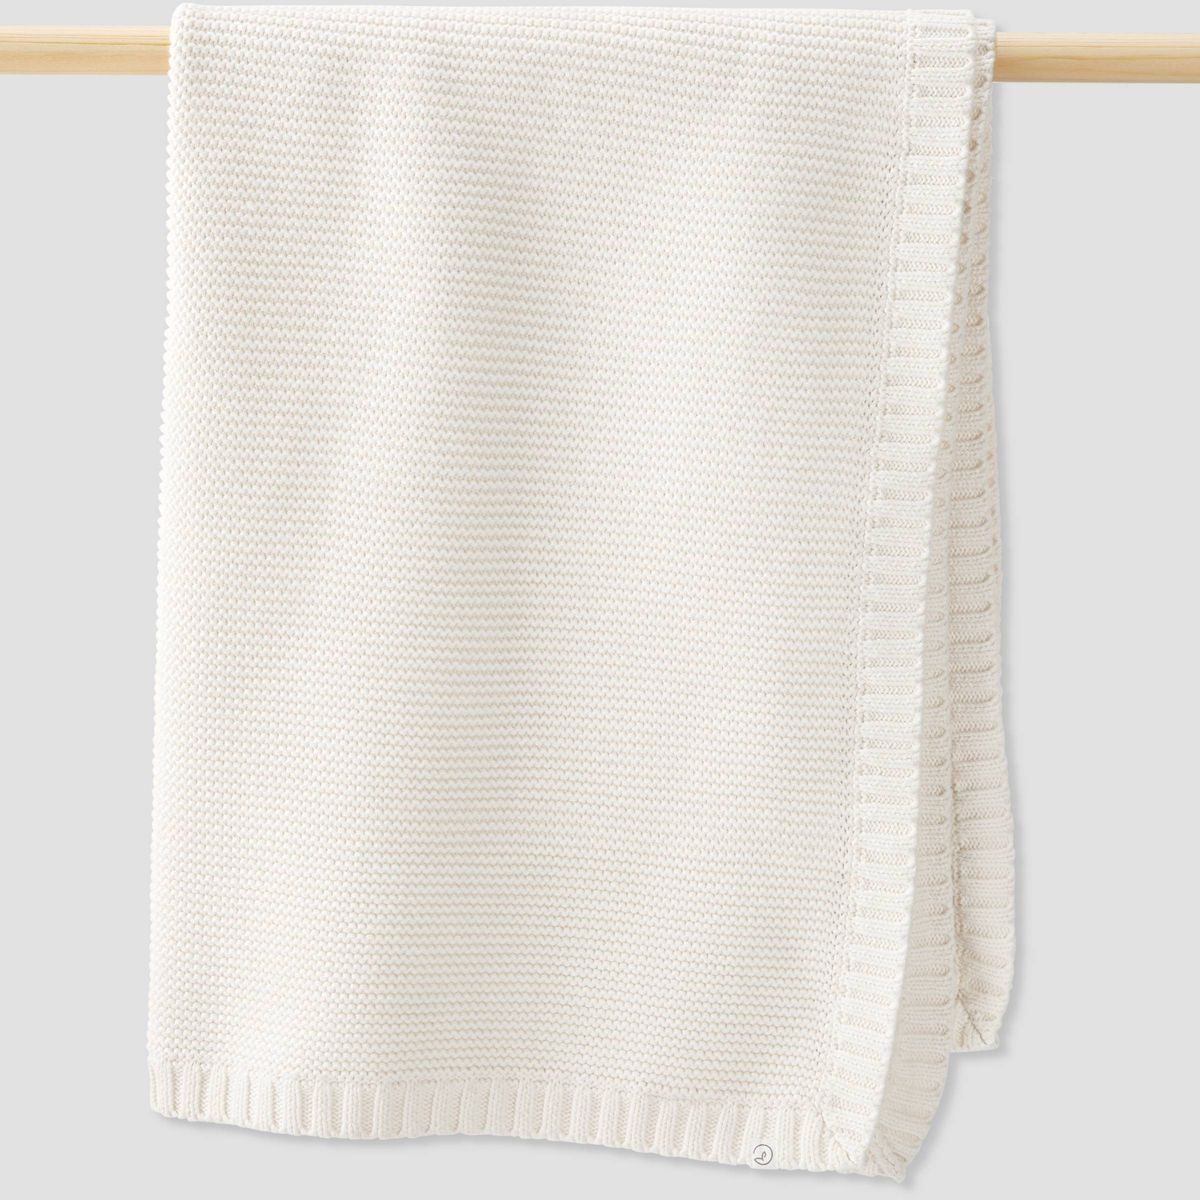 Little Planet by carter's Sweater Knit Baby Blanket - Creme | Target